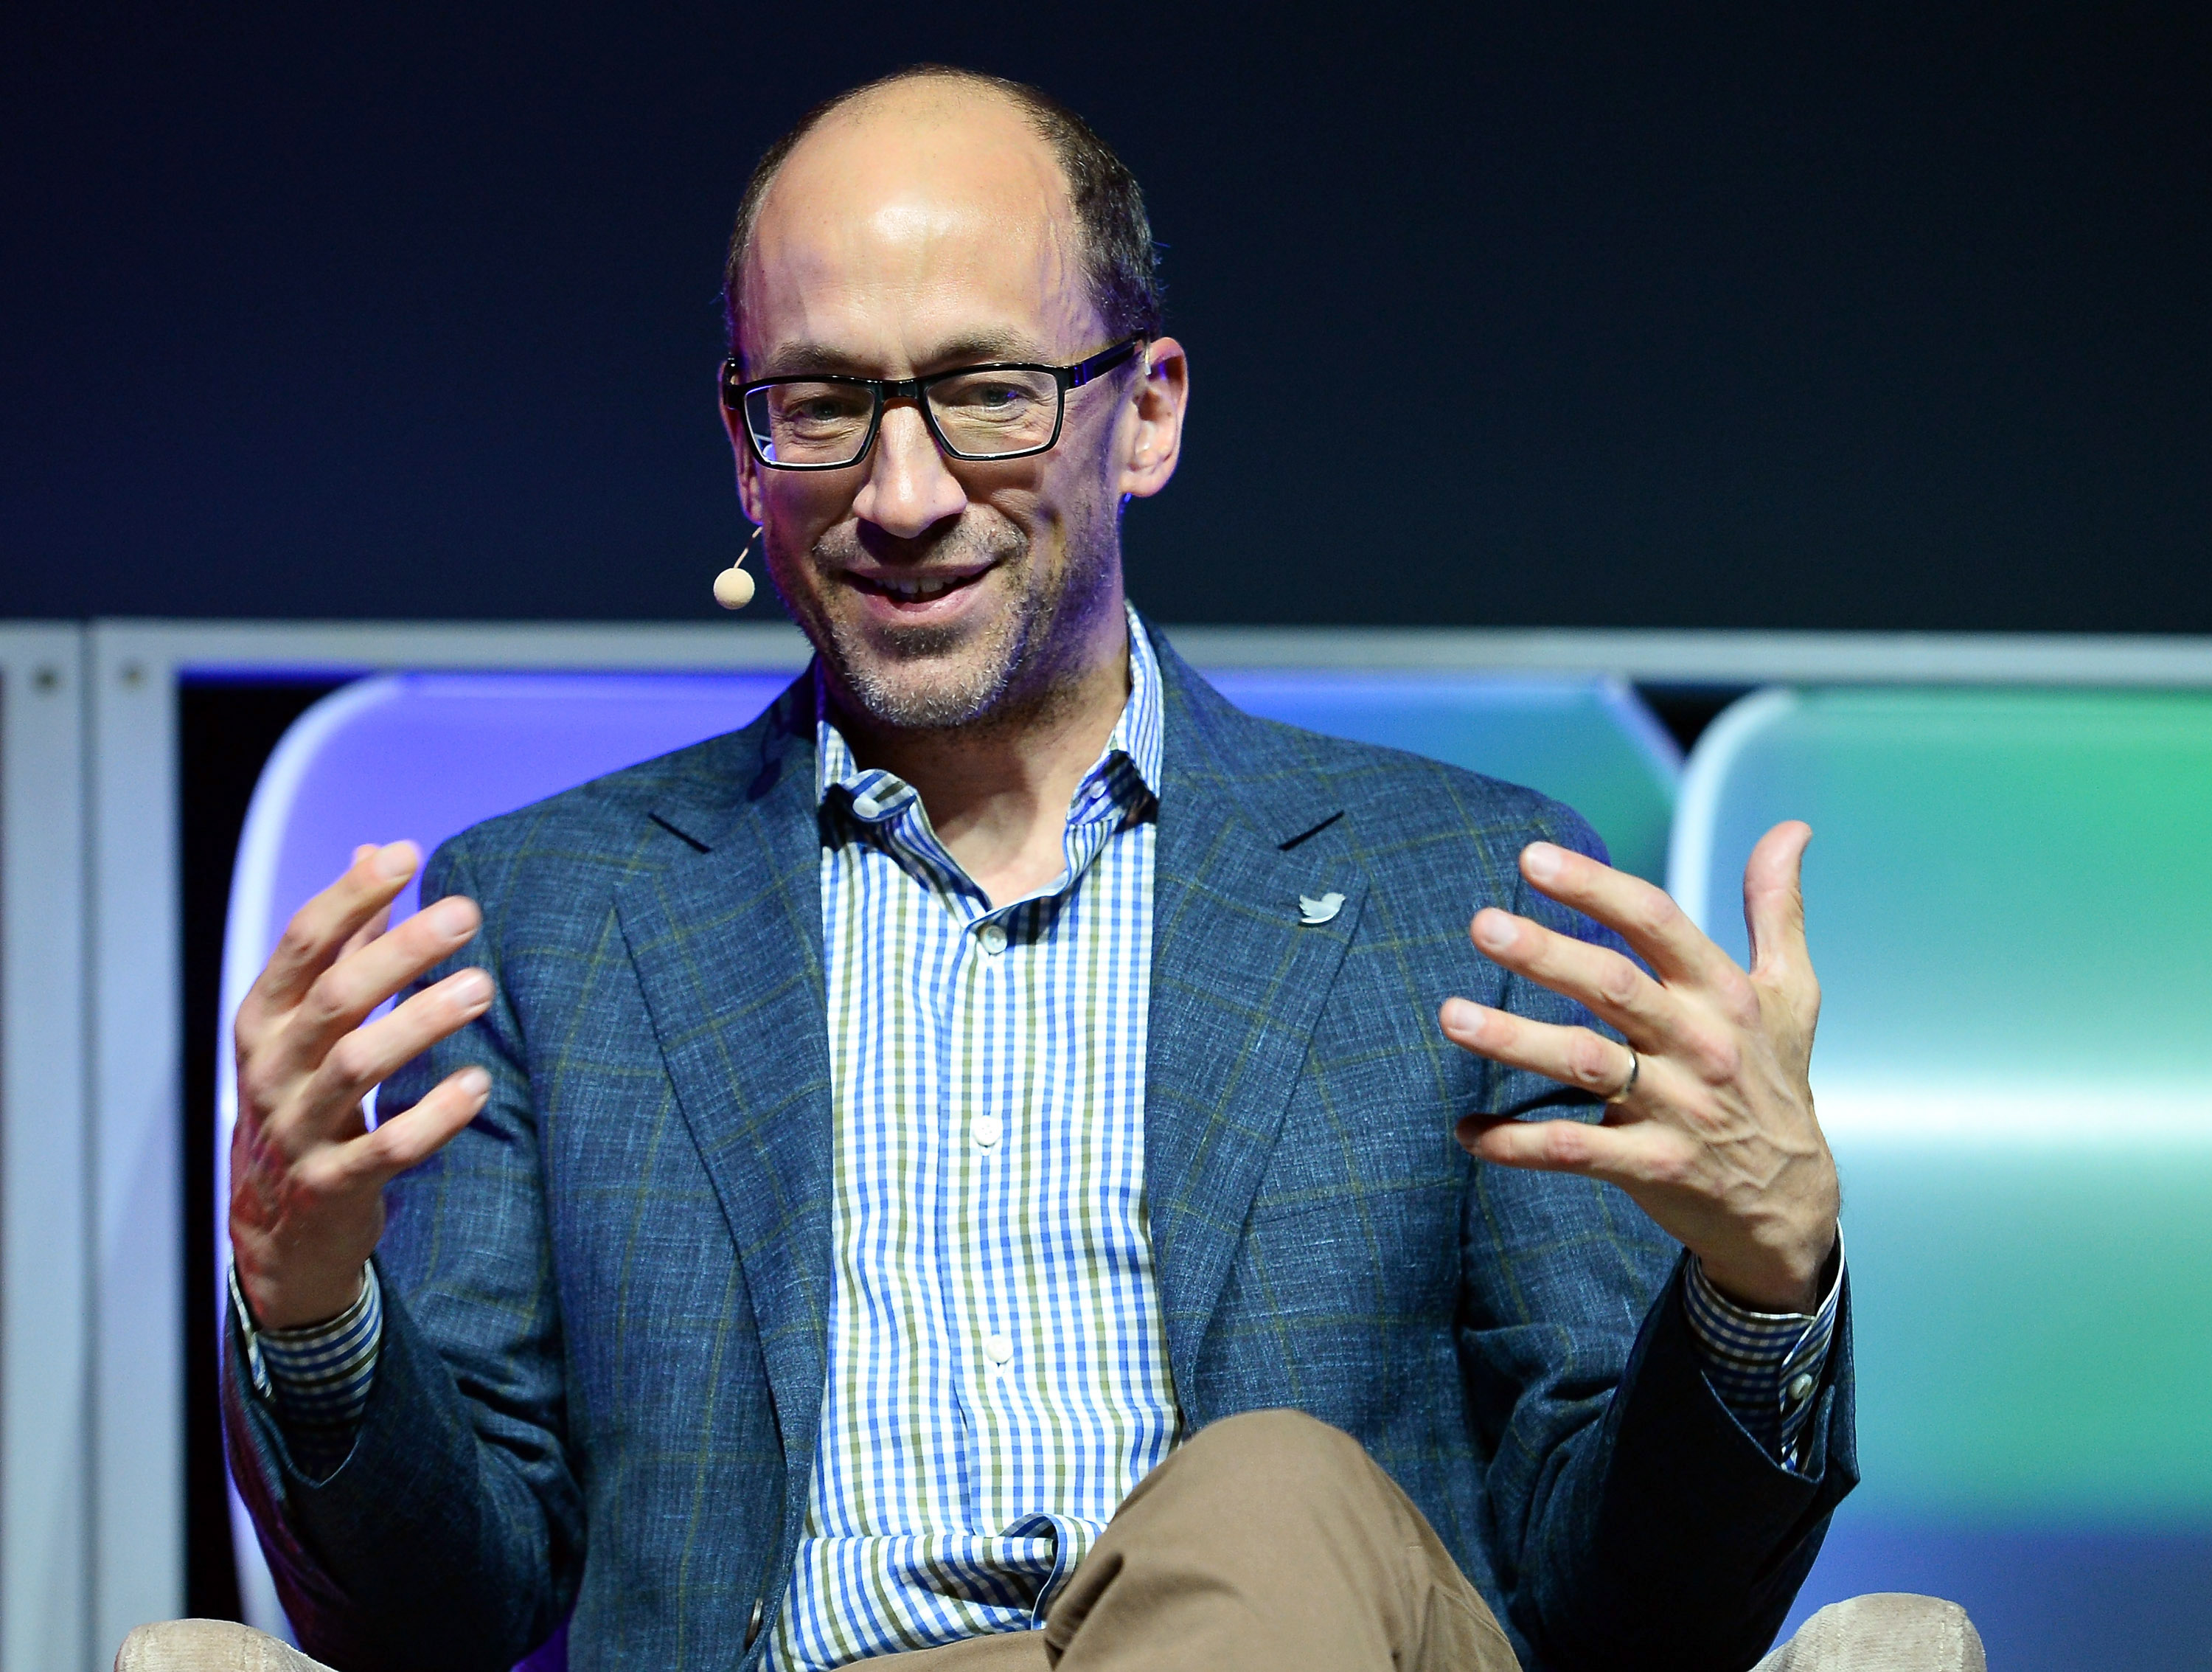 Twitter CEO Dick Costolo speaks during the Brand Matters keynote address at the 2014 International CES at The Las Vegas Hotel &amp; Casino on January 8, 2014 in Las Vegas, Nevada. (Ethan Miller—Getty Images)